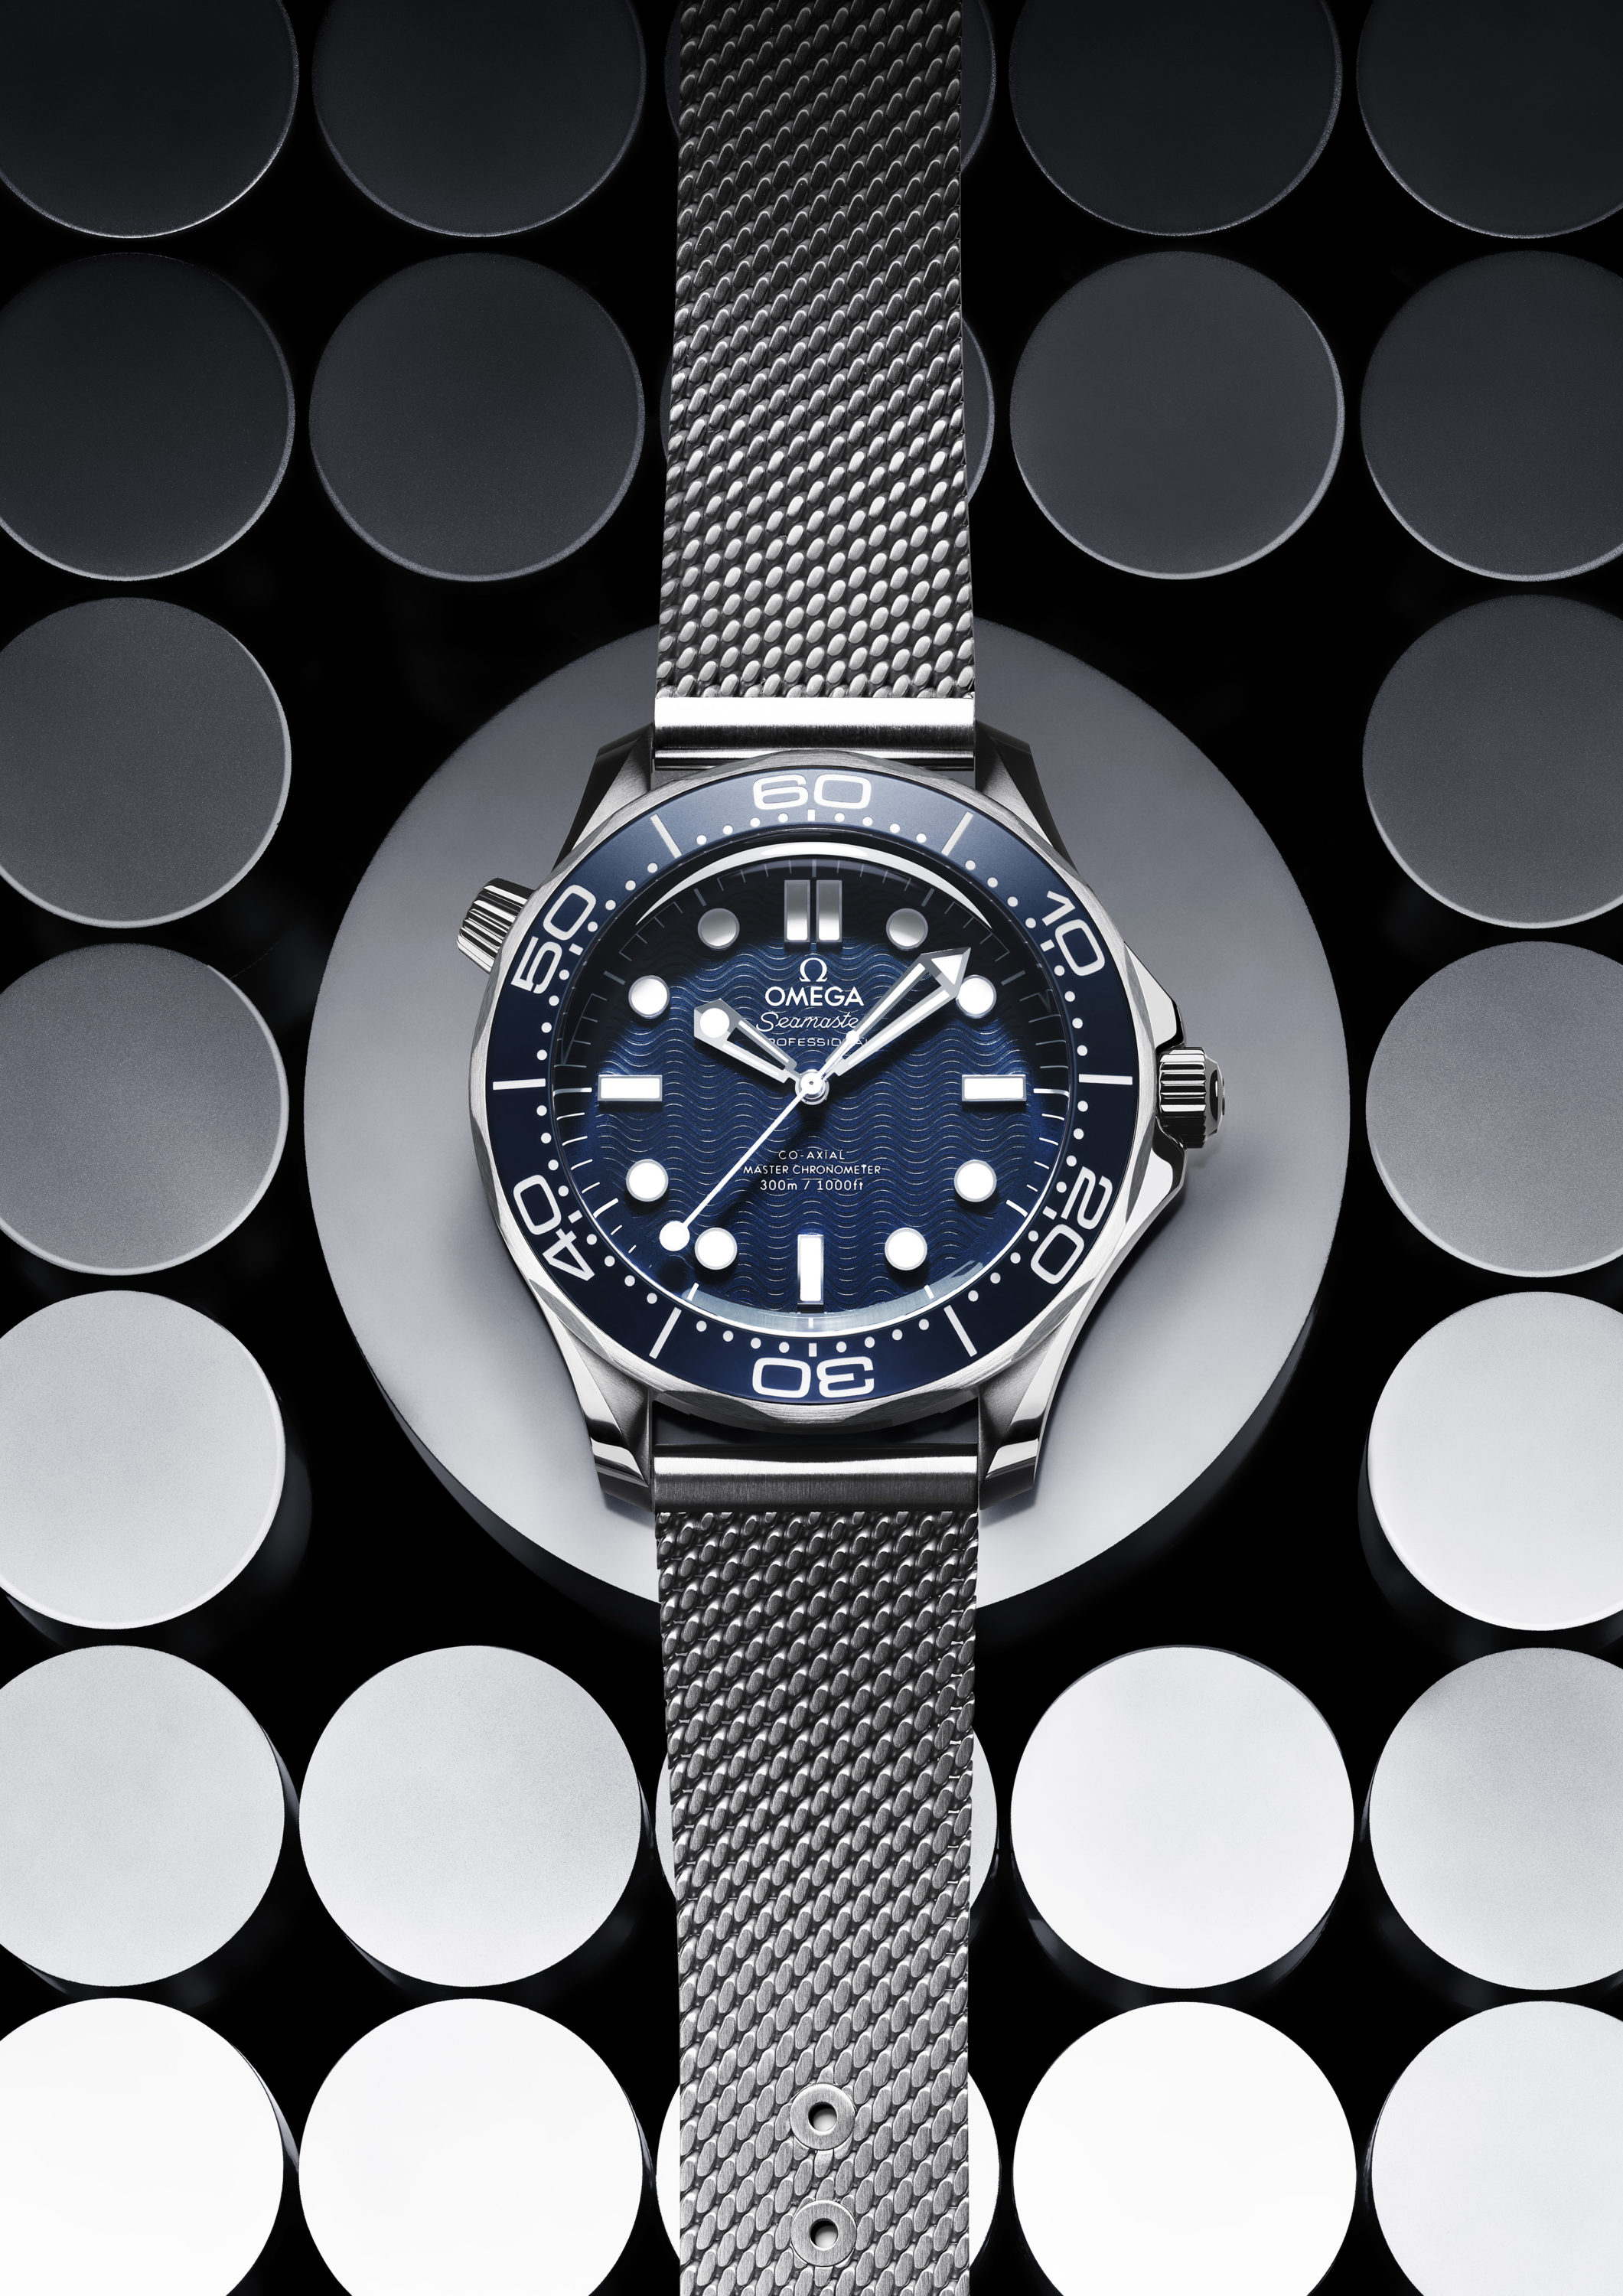 Omega Celebrates the 60th Anniversary of James Bond With Two Special Seamaster Models